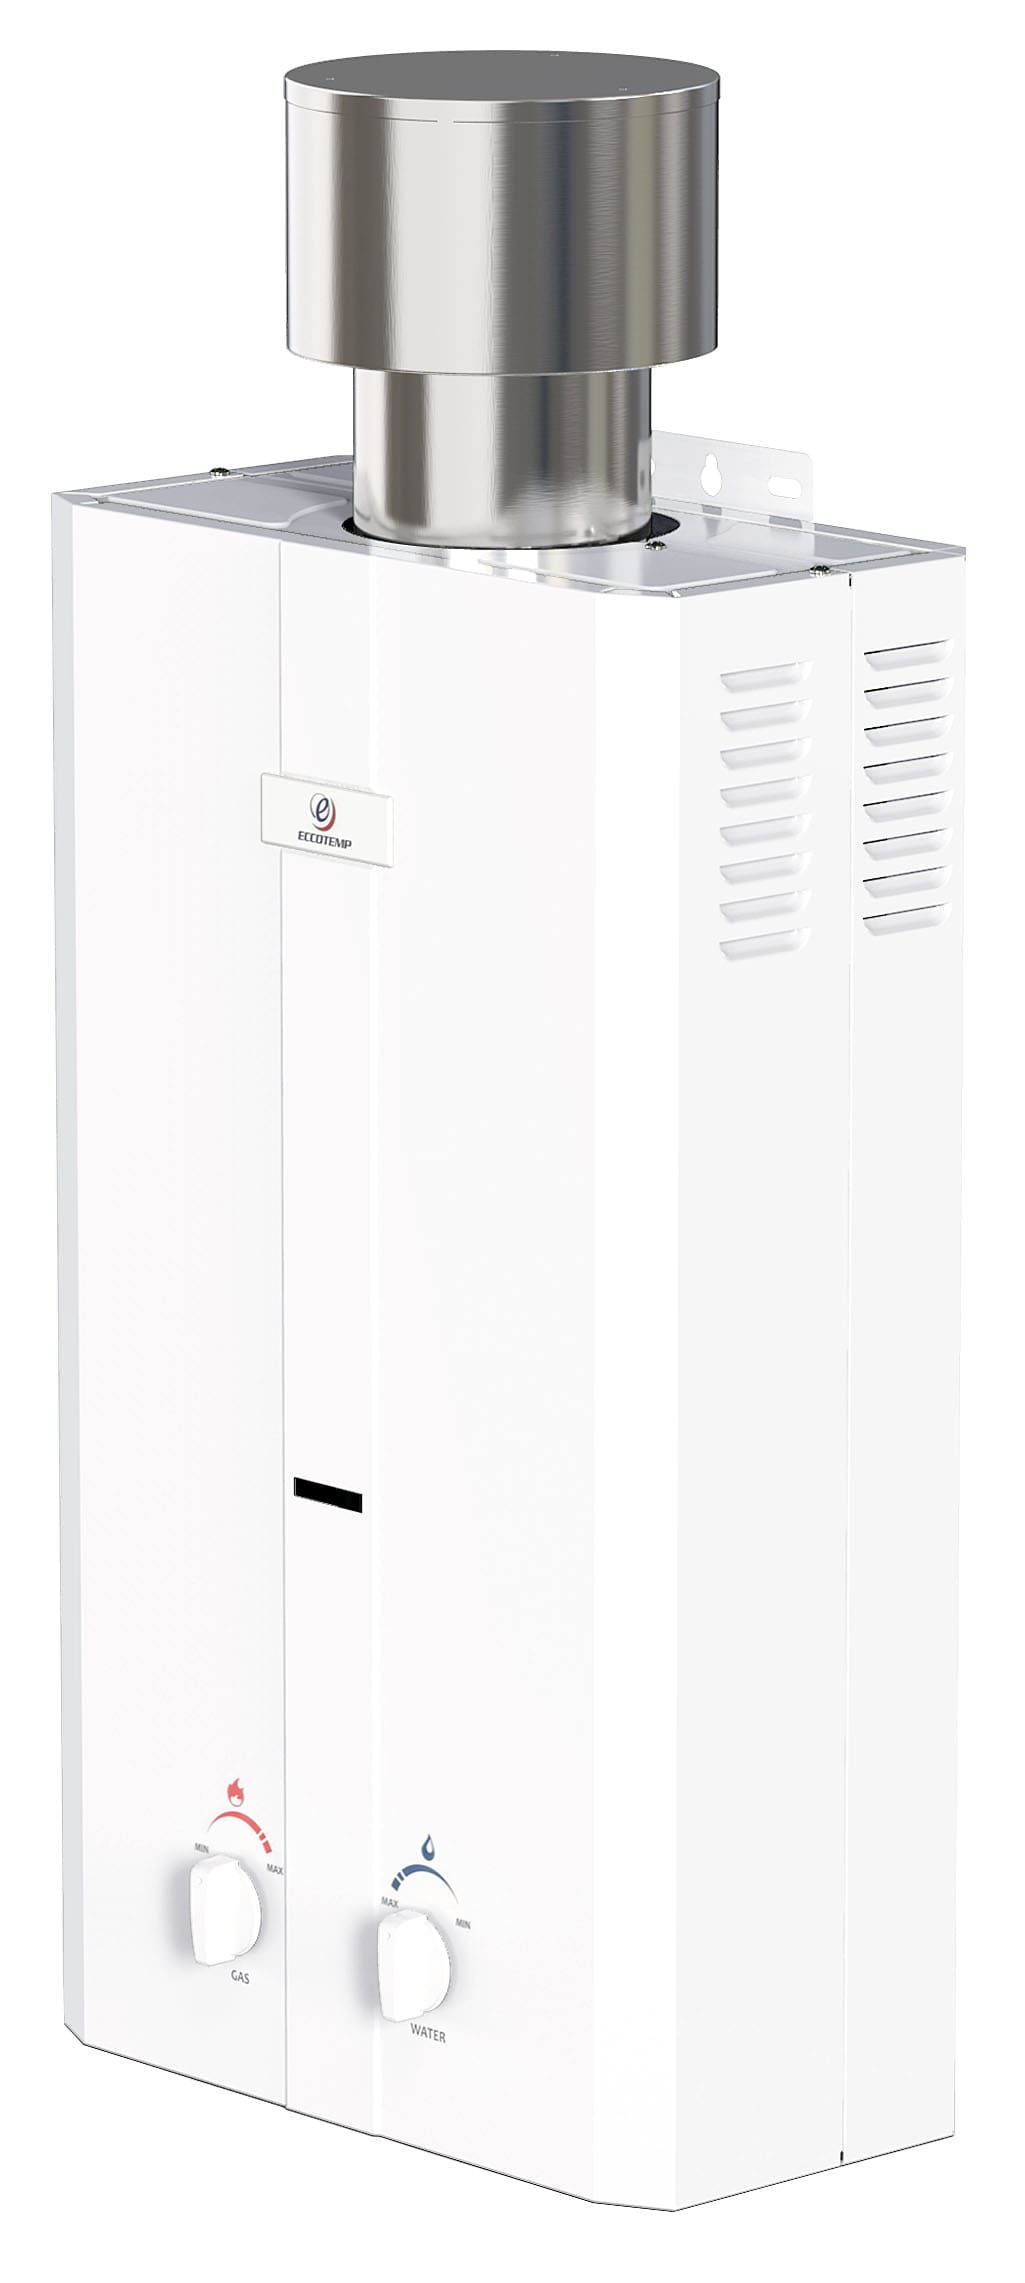 Eccotemp® L10 High Capacity Tankless Water Heater